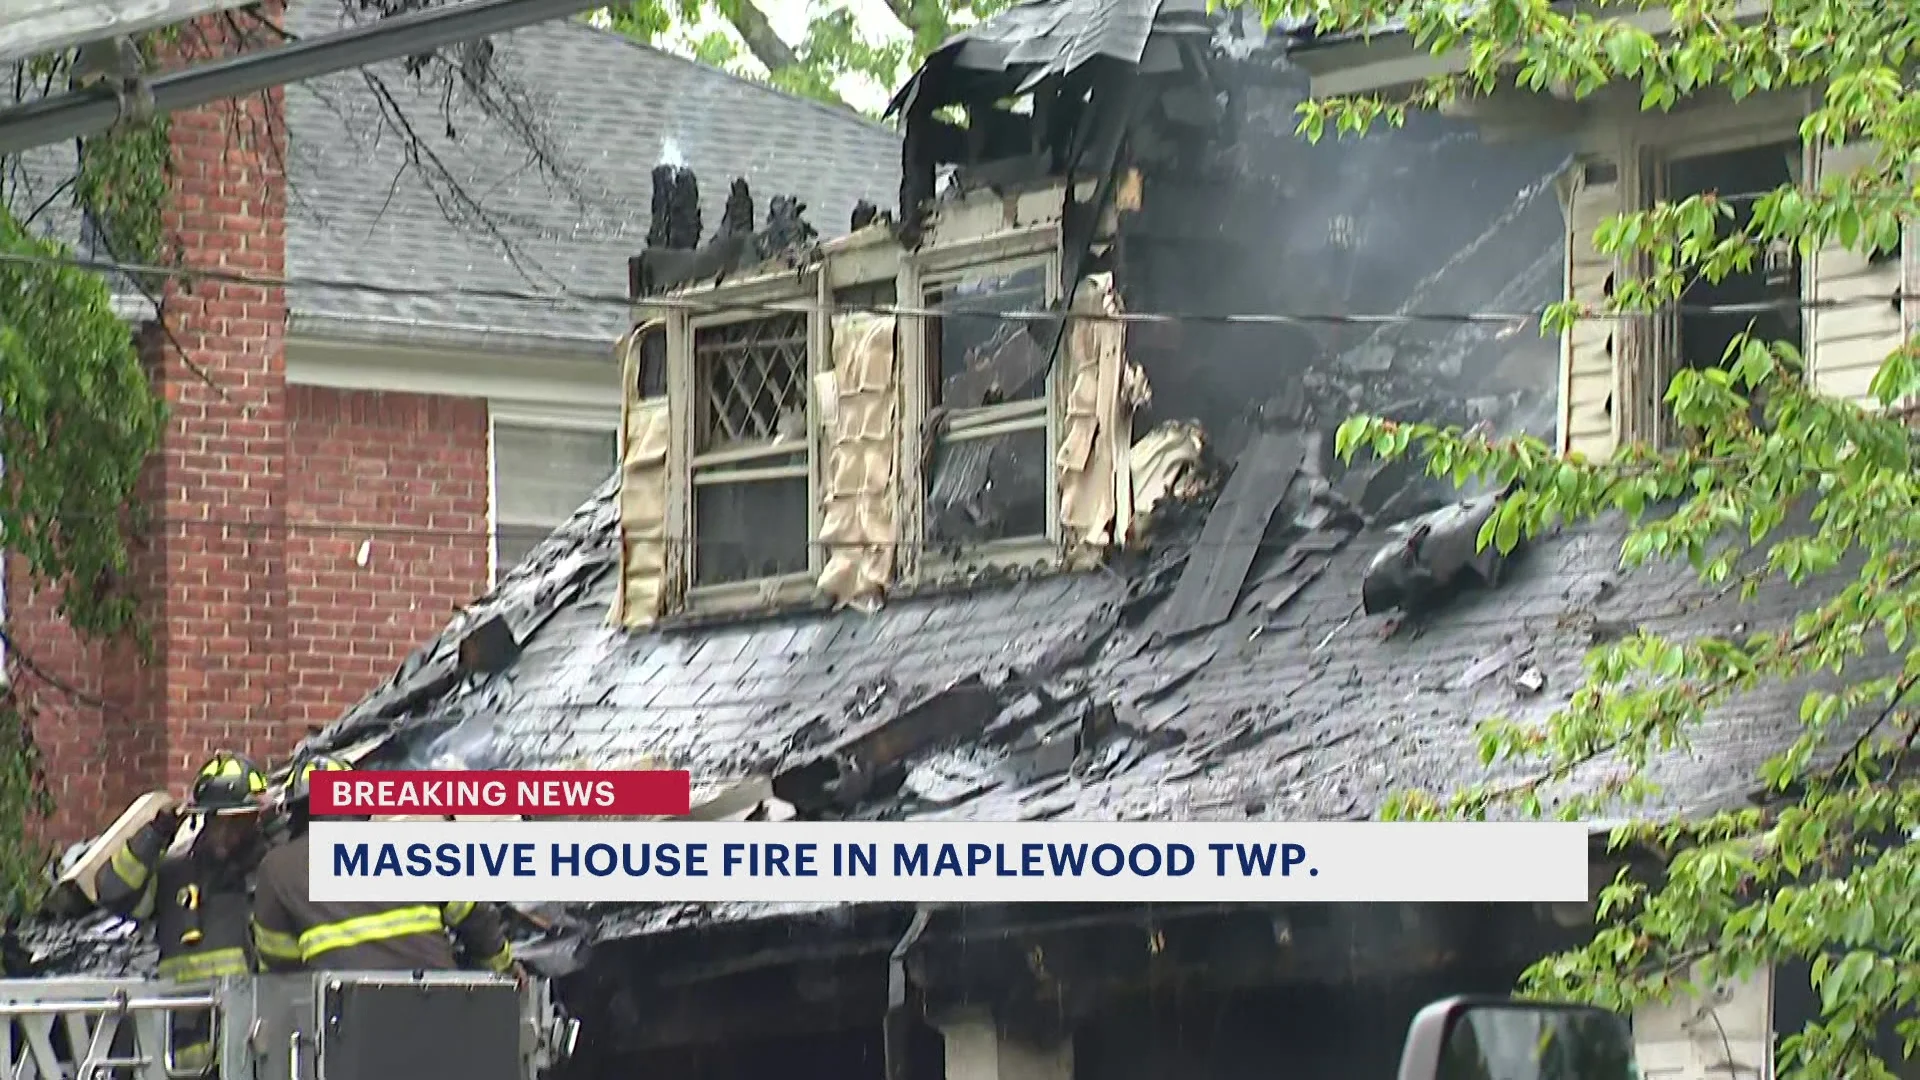 Large fire engulfs home in Maplewood